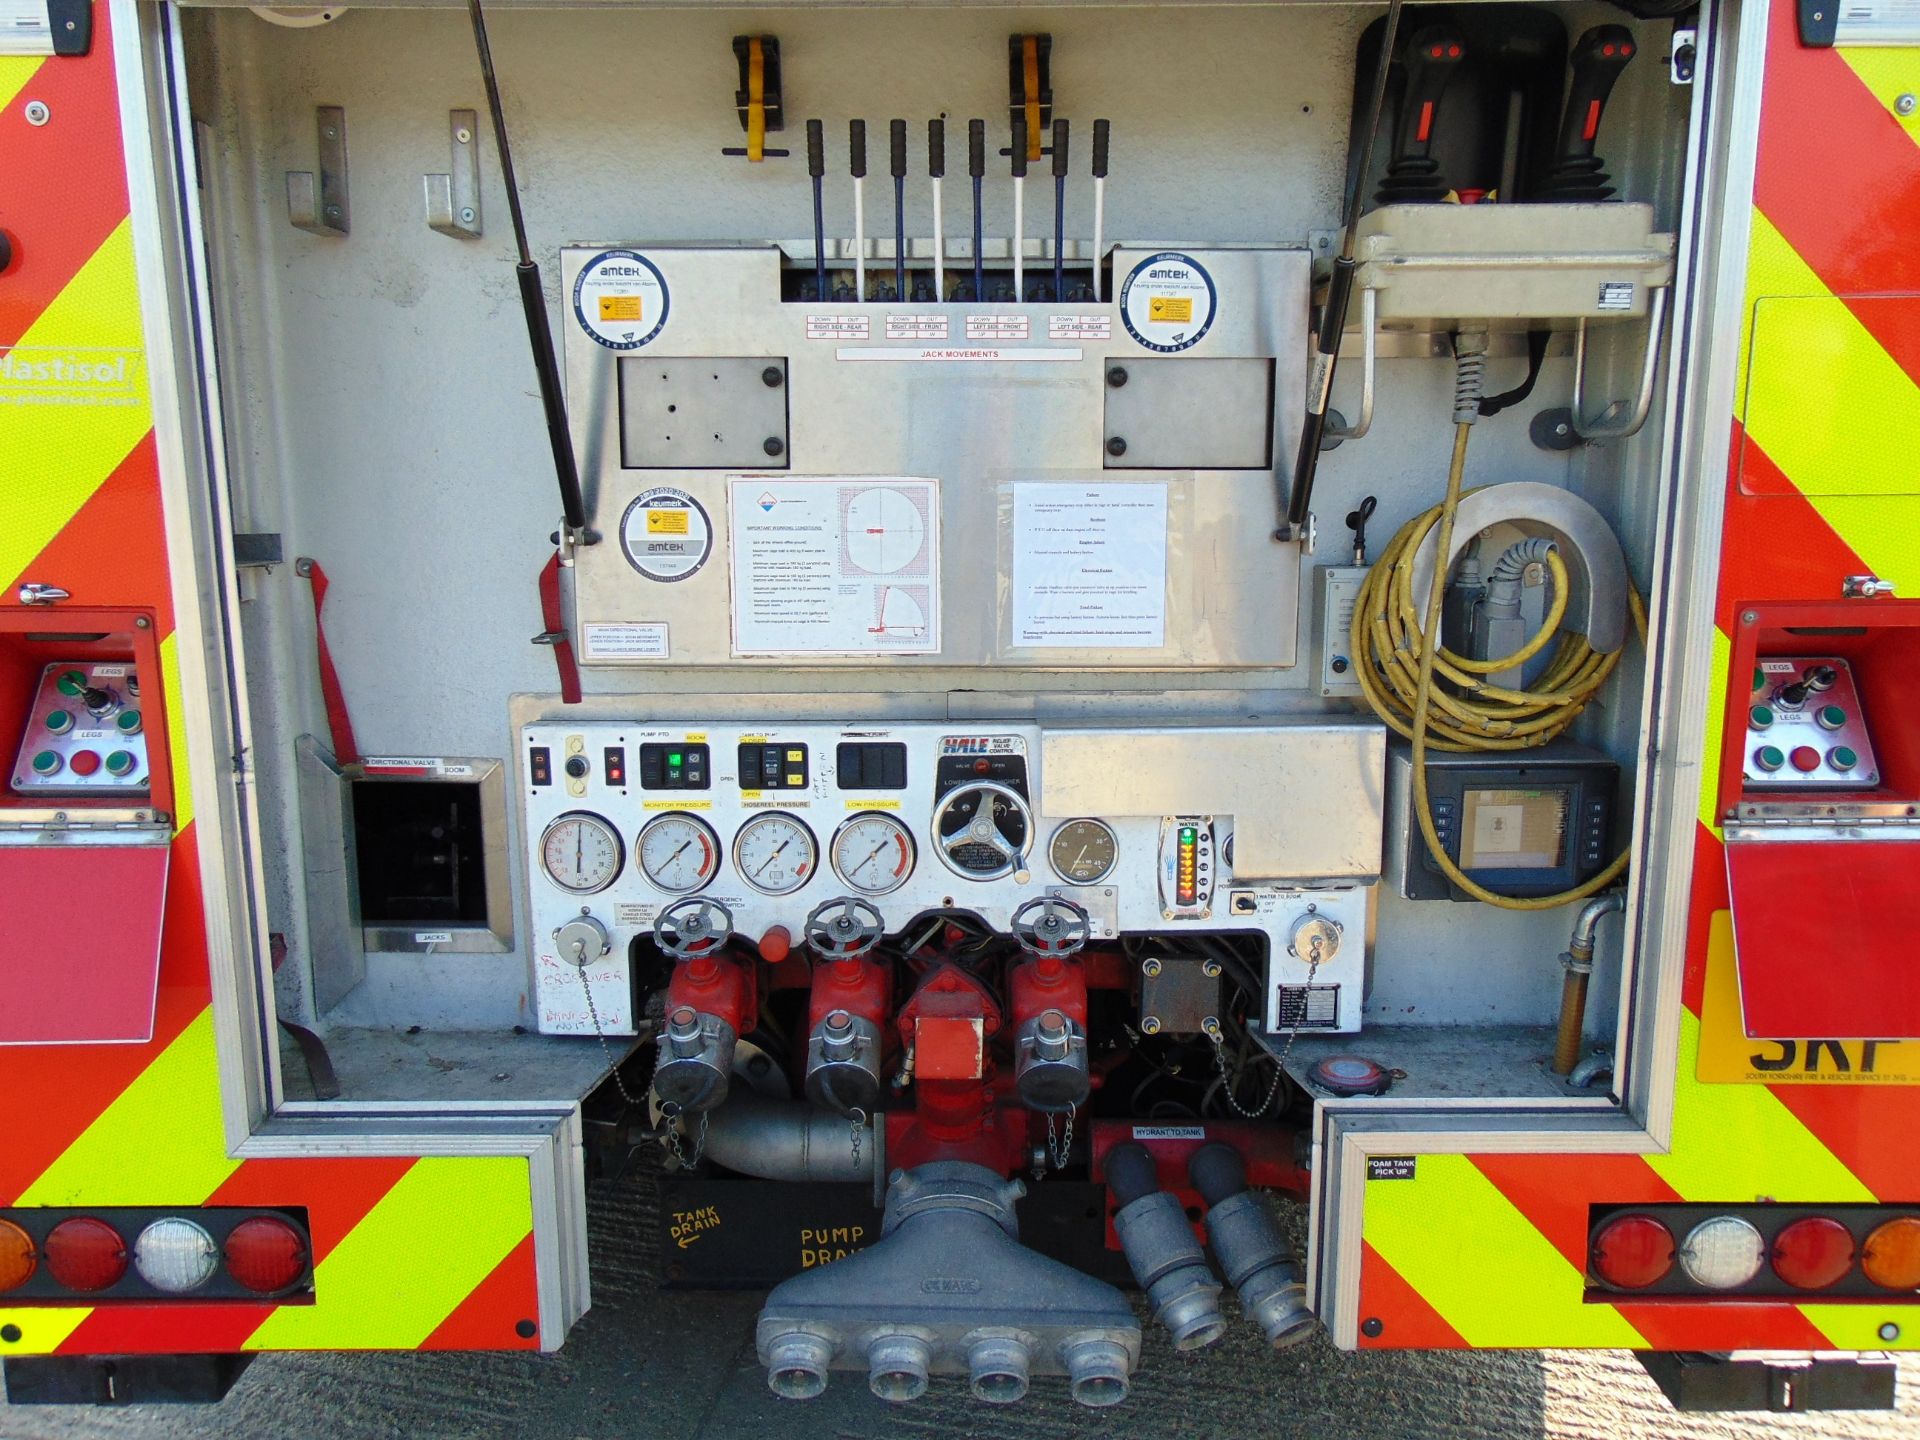 2008 Mercedes Econic CARP (Combined Aerial Rescue Pump) 6x2 Aerial Work Platform / Fire Appliance - Image 31 of 49